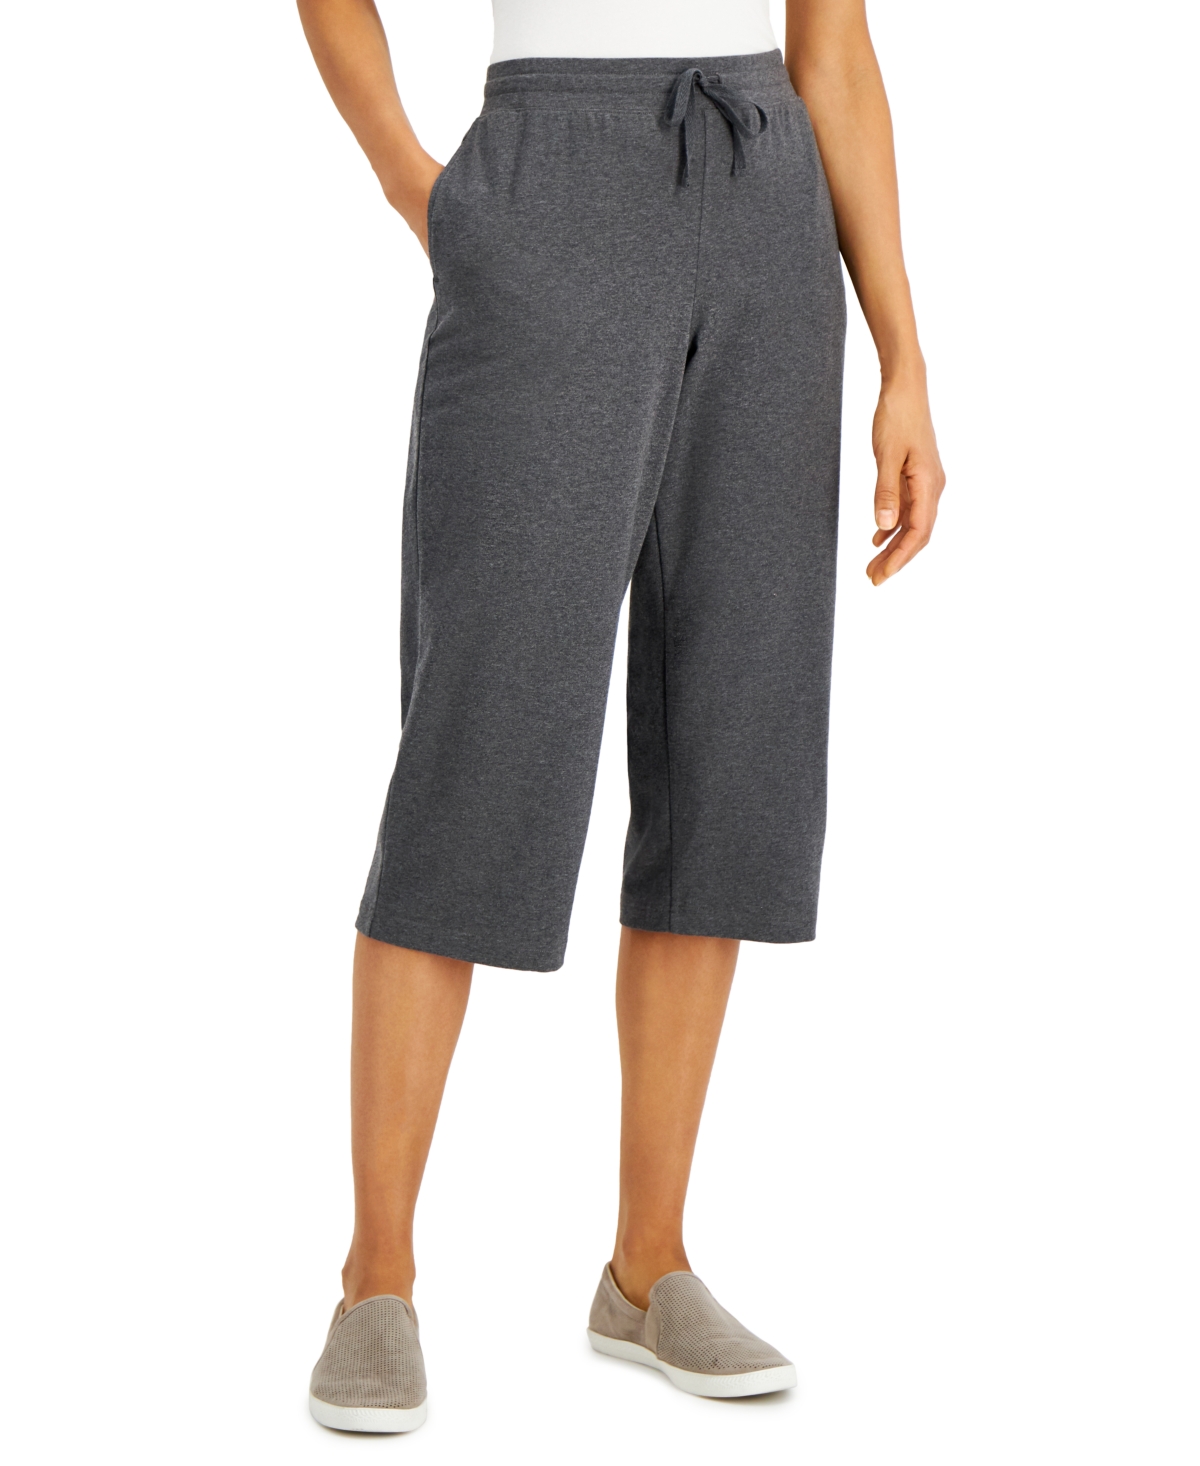 Knit Capri Pull on Pants, Created for Macy's - Charcoal Heather